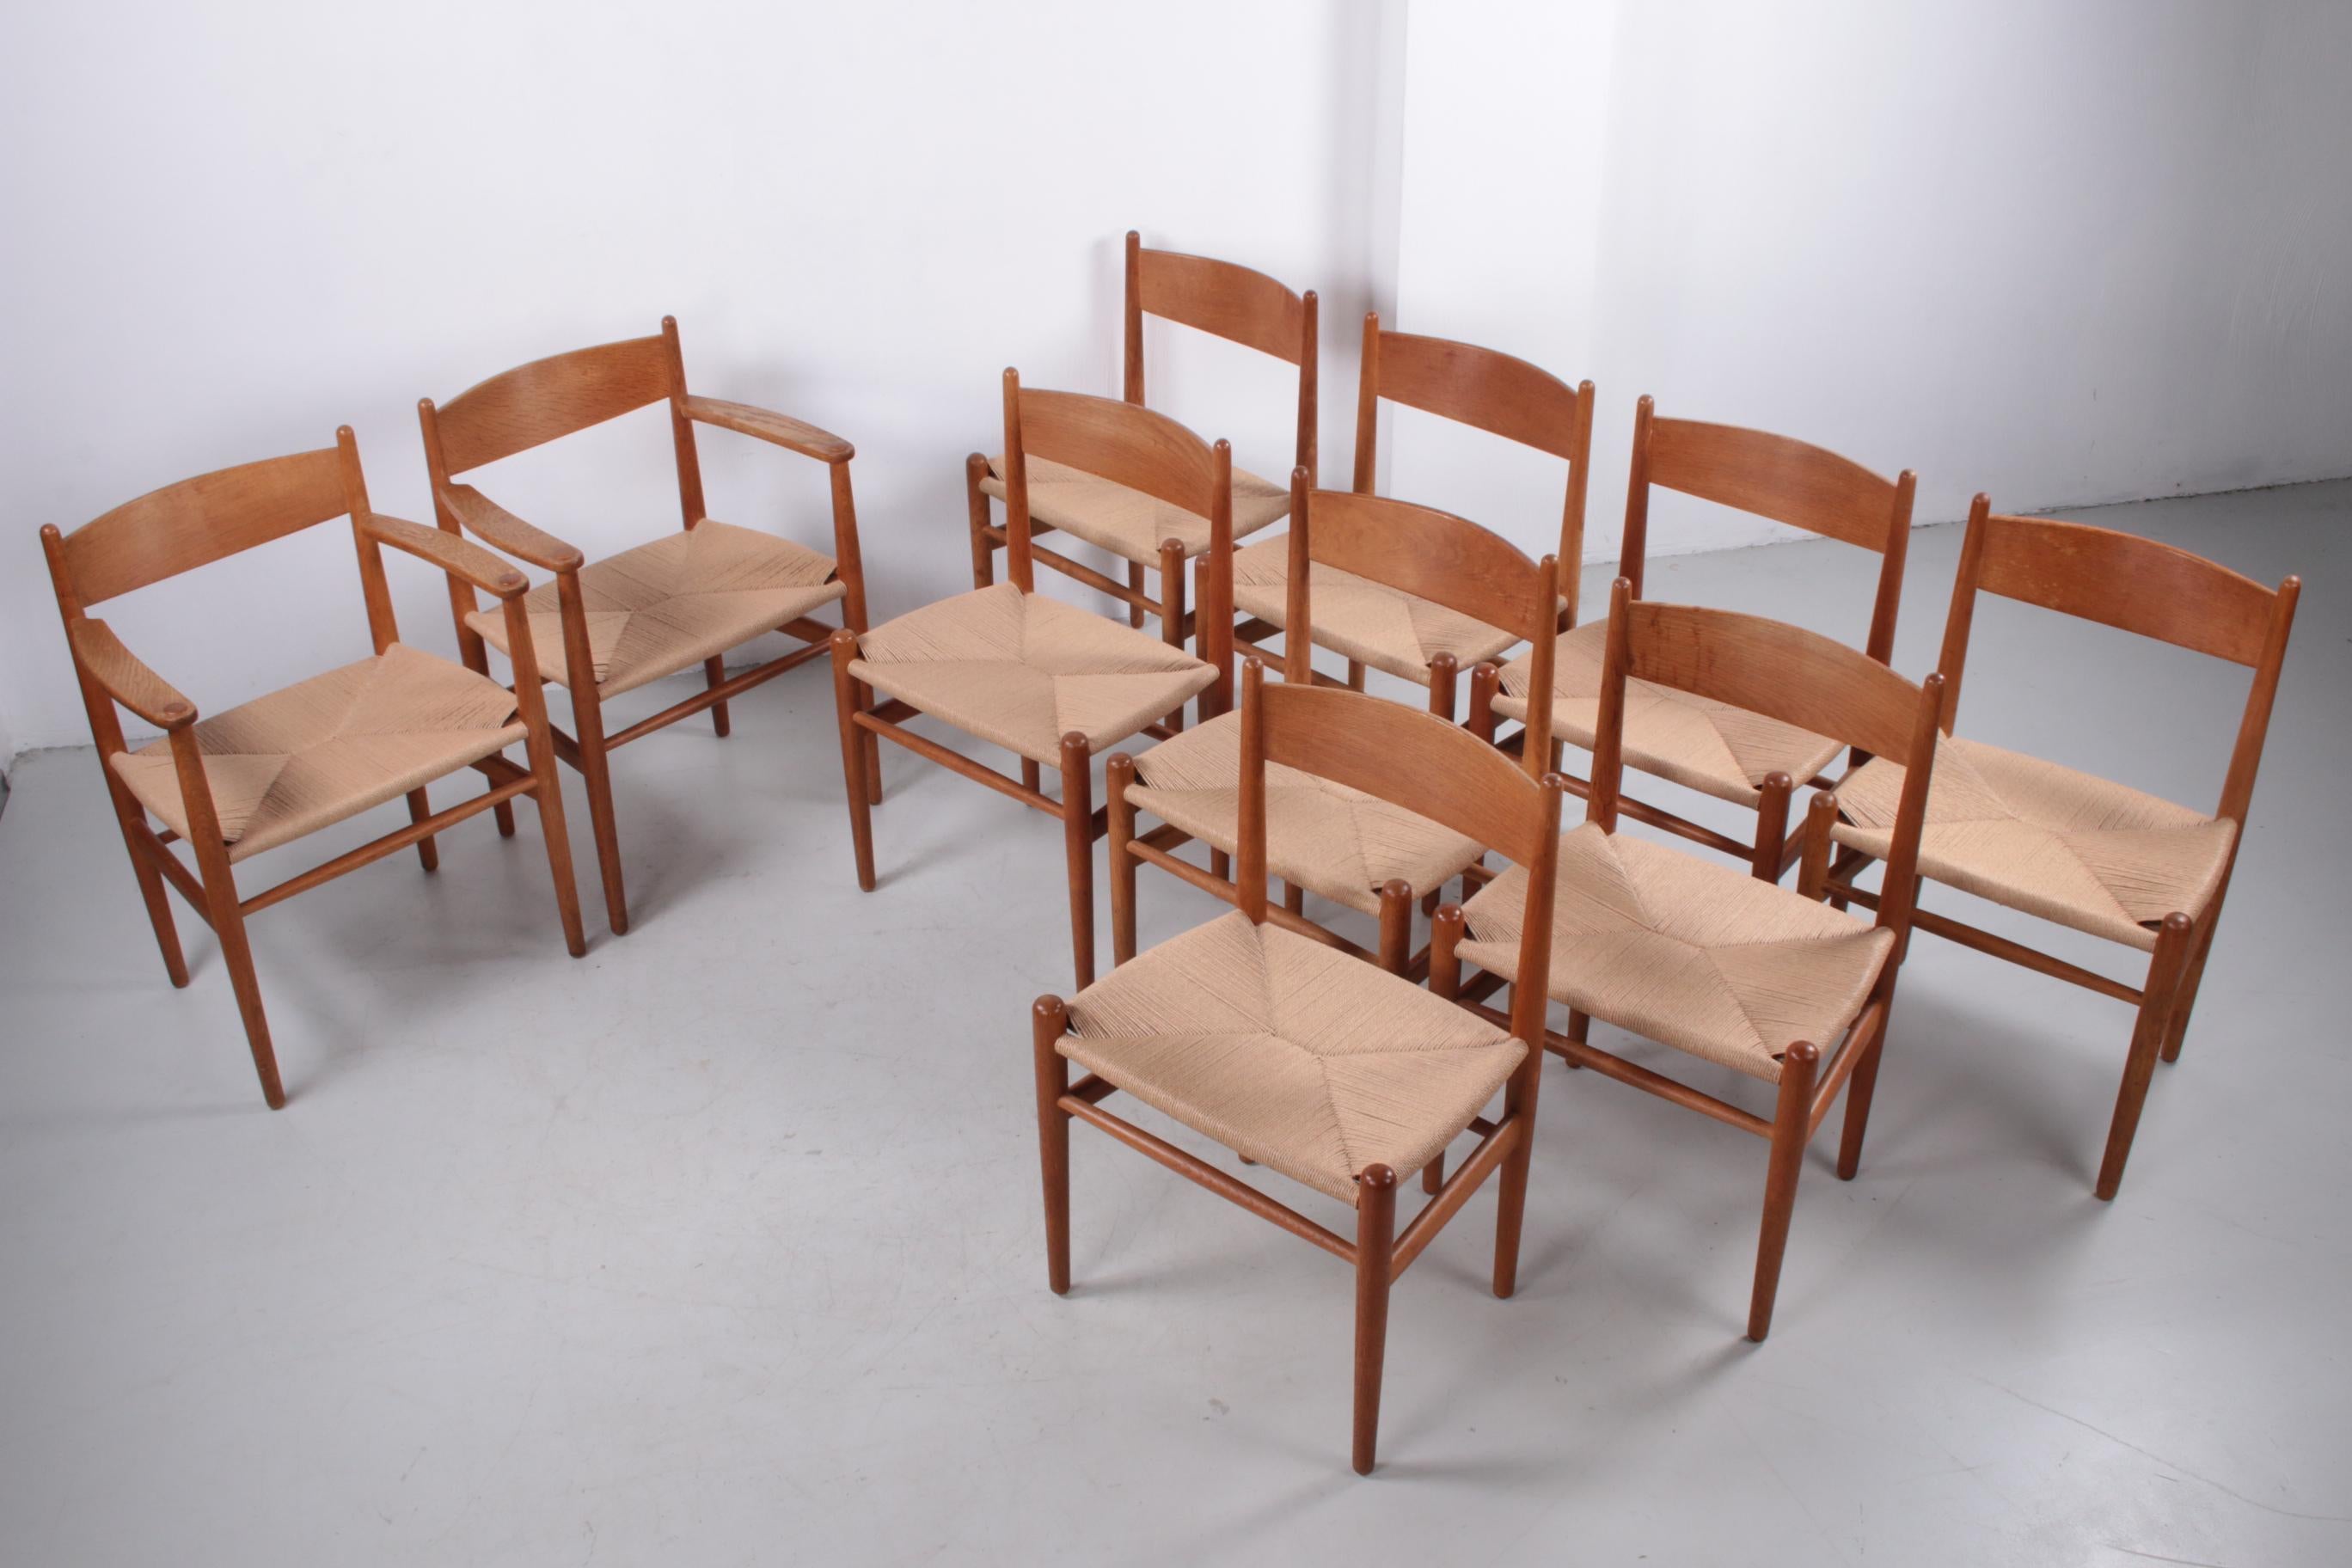 Set of 10 CH36' and CH37 dining chairs by Hans Wegner for Carl Hansen & Søn, Denmark.

The CH36 dining chair by Hans J. Wegner is made with great attention to every detail in a simple and functional design. This 1962 design demonstrates the